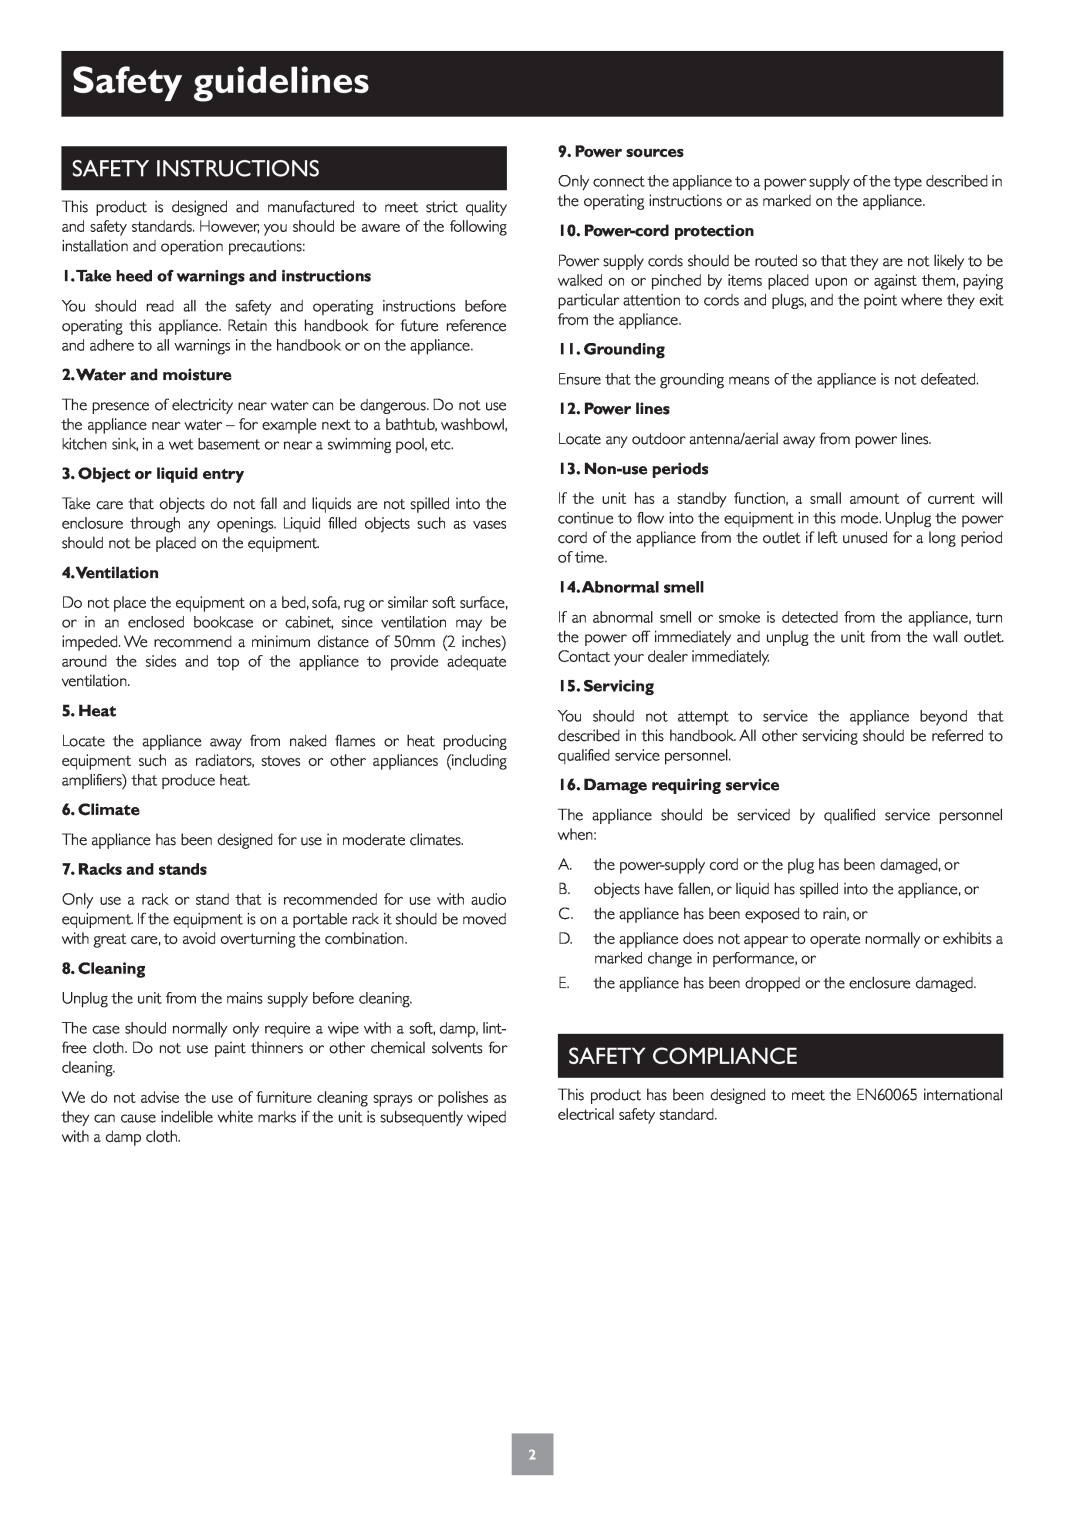 Arcam CD33 manual Safety guidelines, Safety Instructions, Safety Compliance 